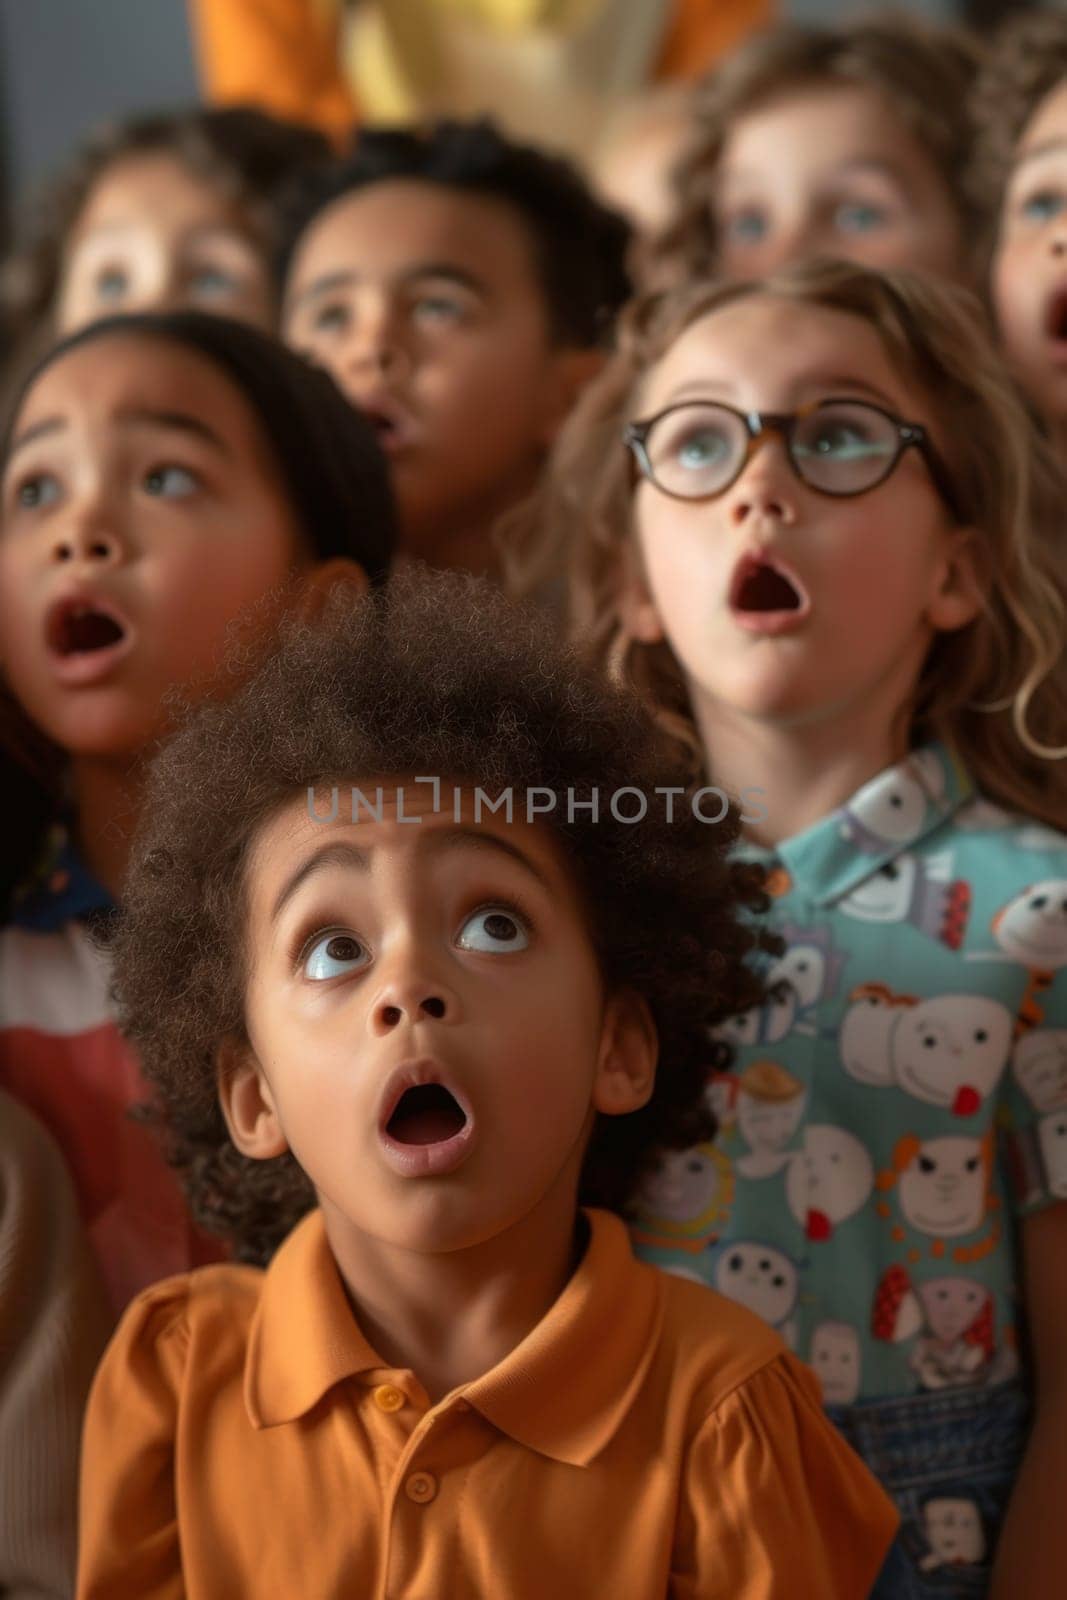 A crowd of children with frightened expressions on their faces.